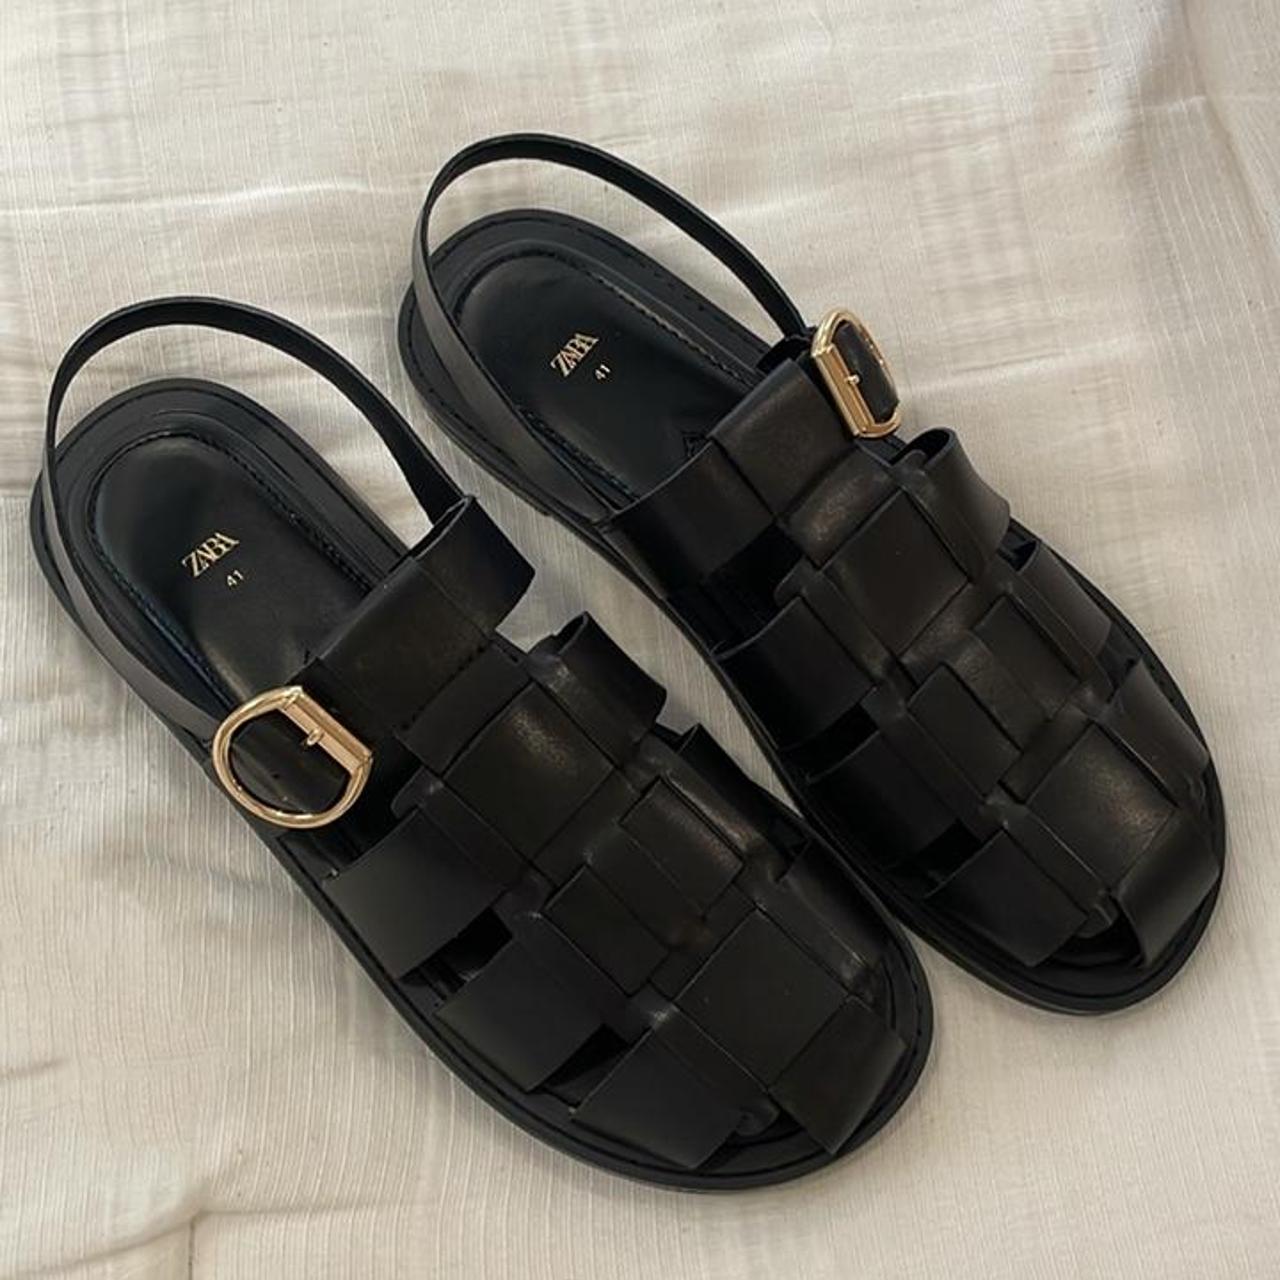 Fisherman Sandals Are Every Editor's Favourite 'Ugly Shoes' | Glamour UK